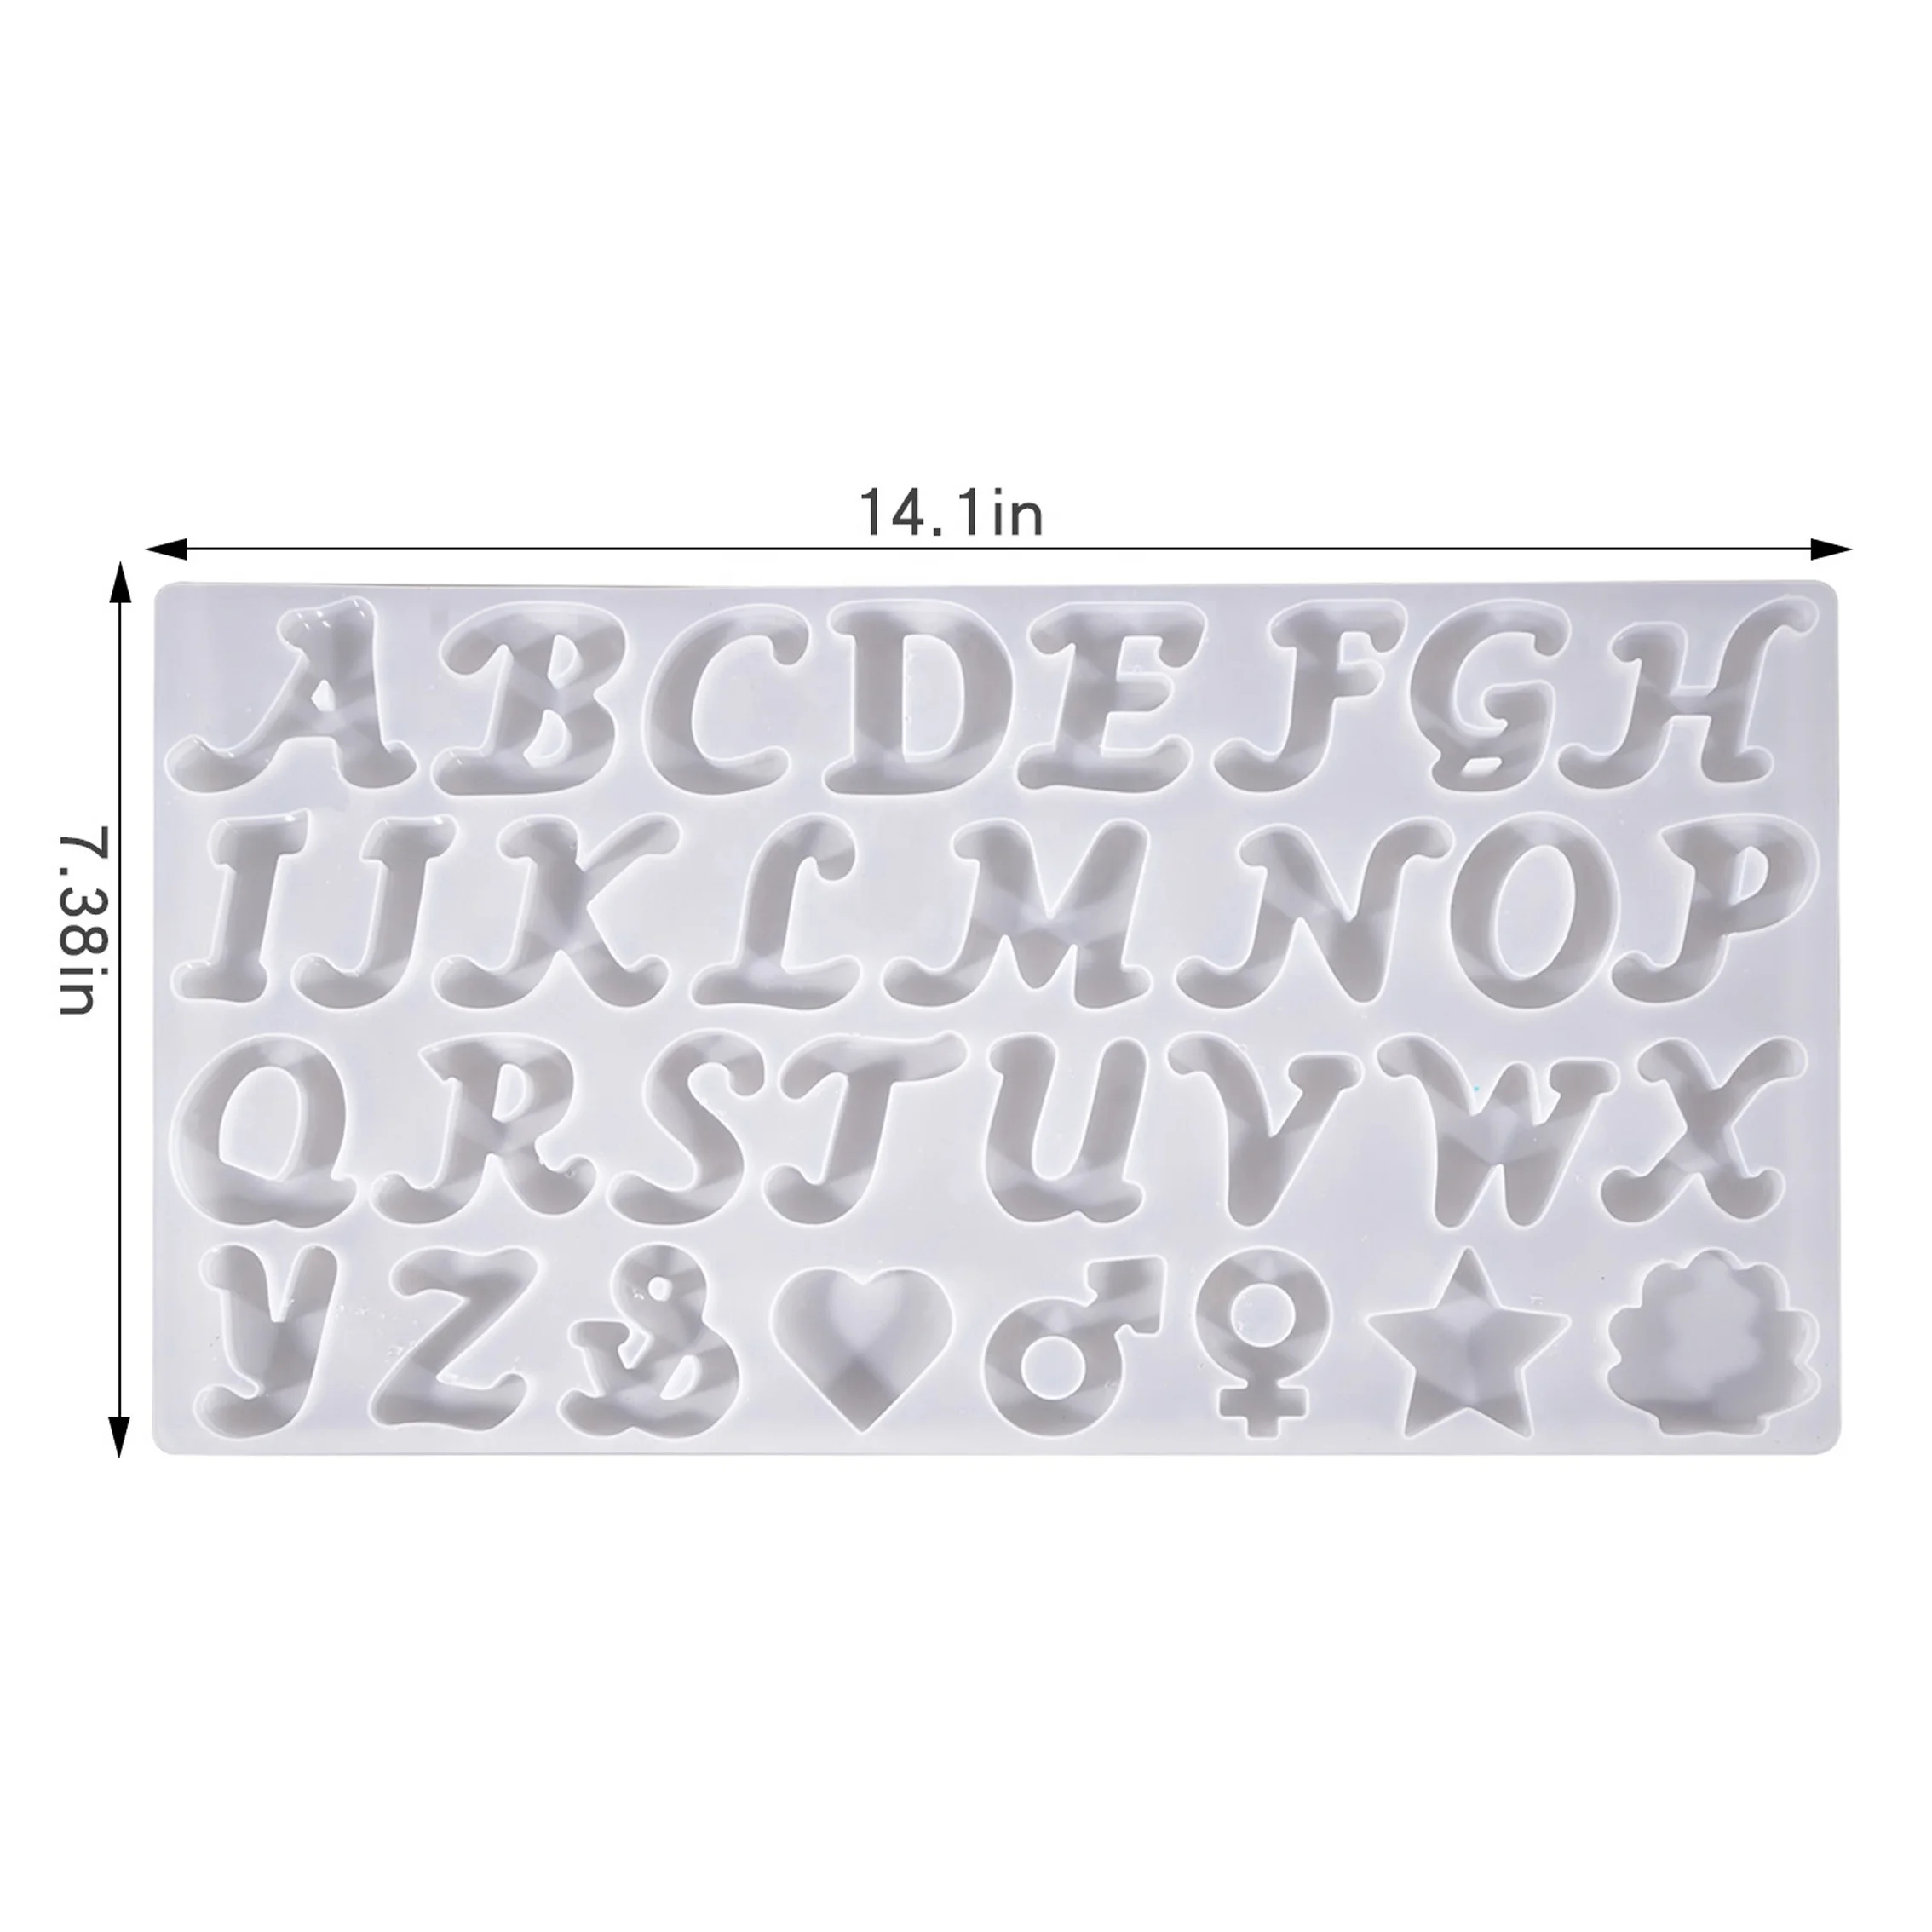 High Quality 3D Resin Silicone Mold for DIY for Jewelry Pendant Crystal Cake Chocolate Cupcake Soap-Alphabet & Number Series